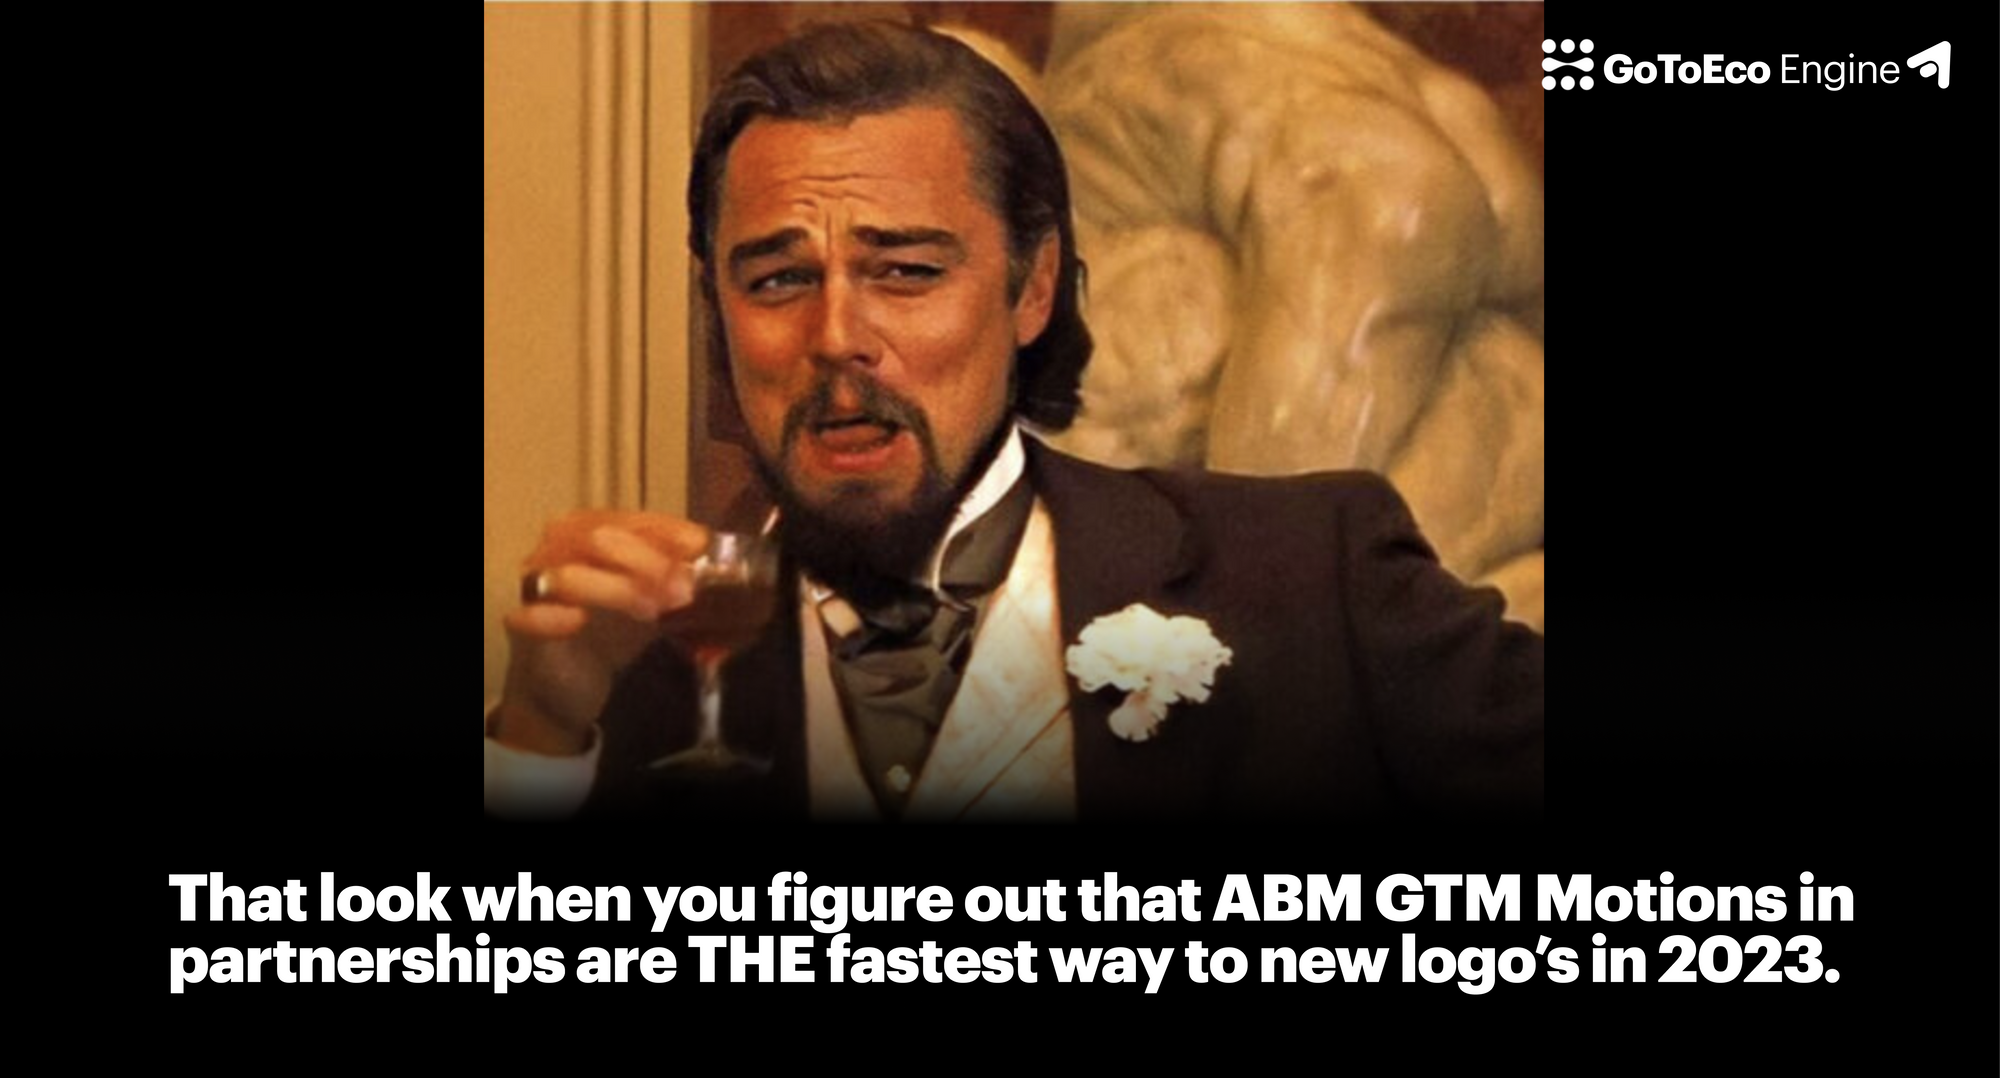 meme: Leonardo DiCaprio smiling with caption, "that look when you figure out that ABM GTM Motions in partnershps are the fastest way to new logo's in 2023